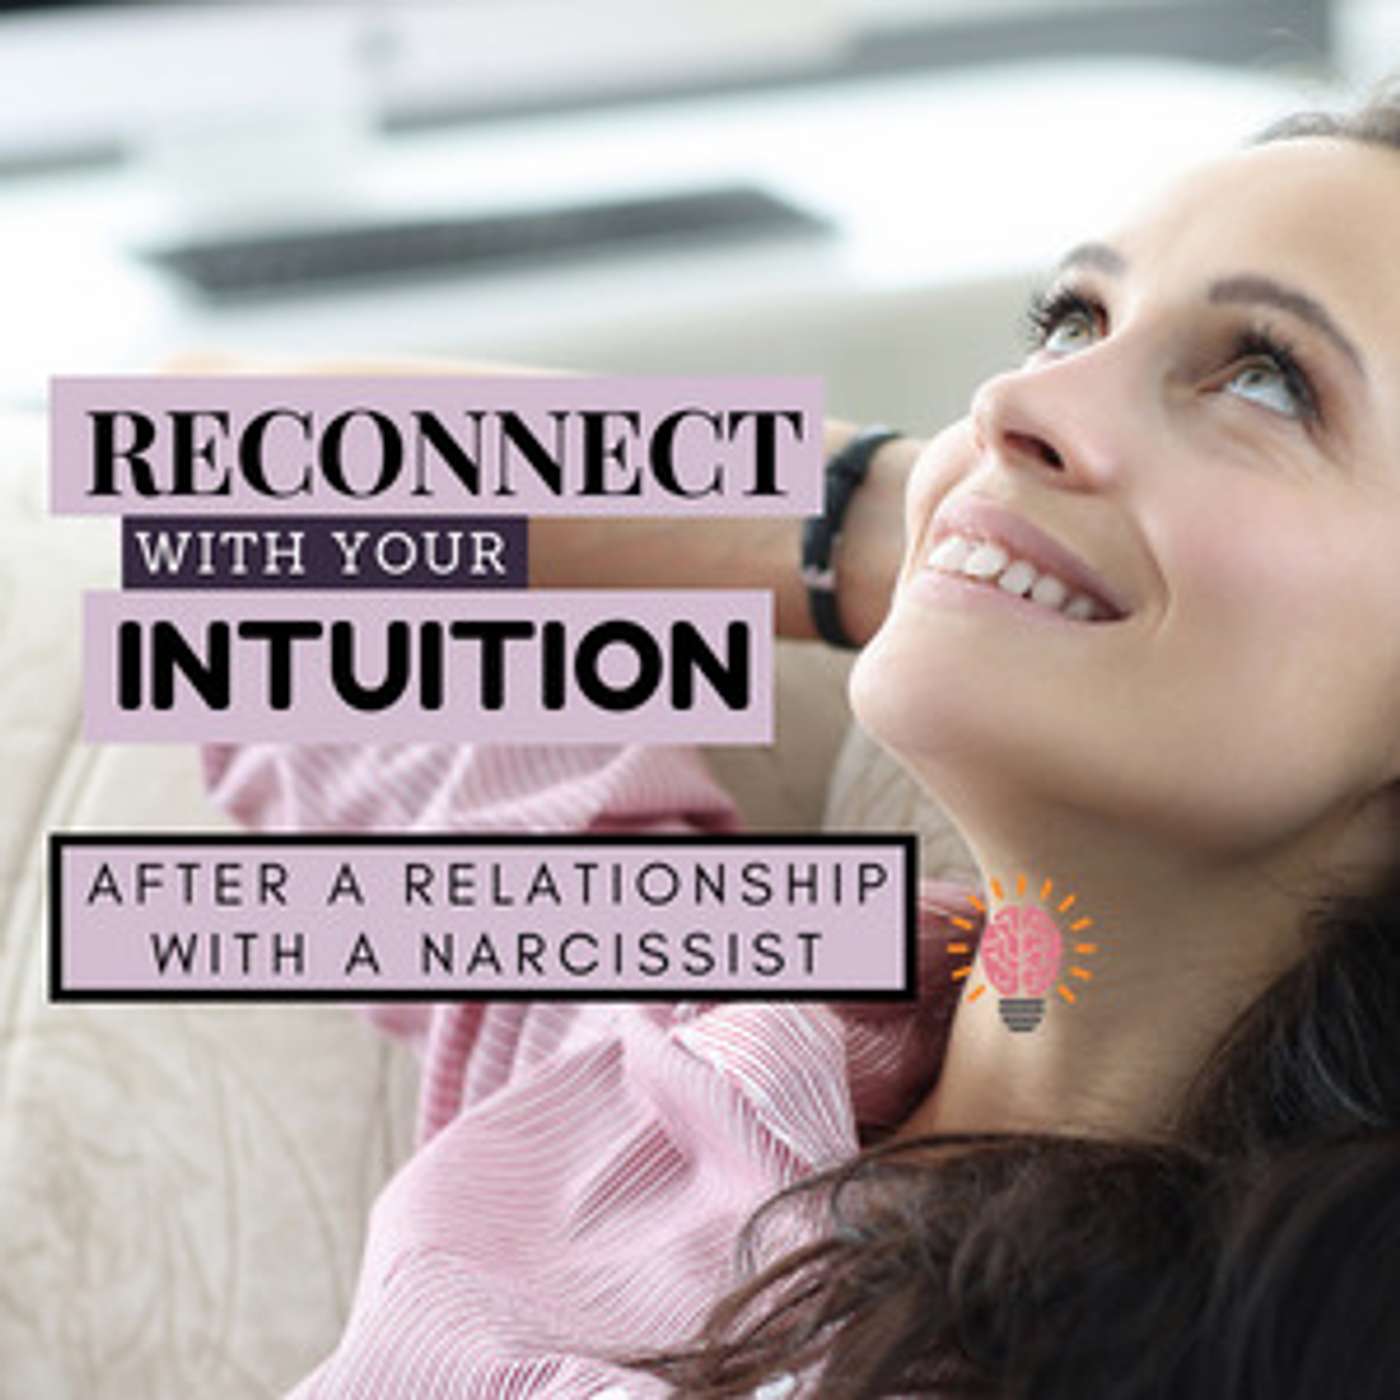 Reconnect with your Intuition